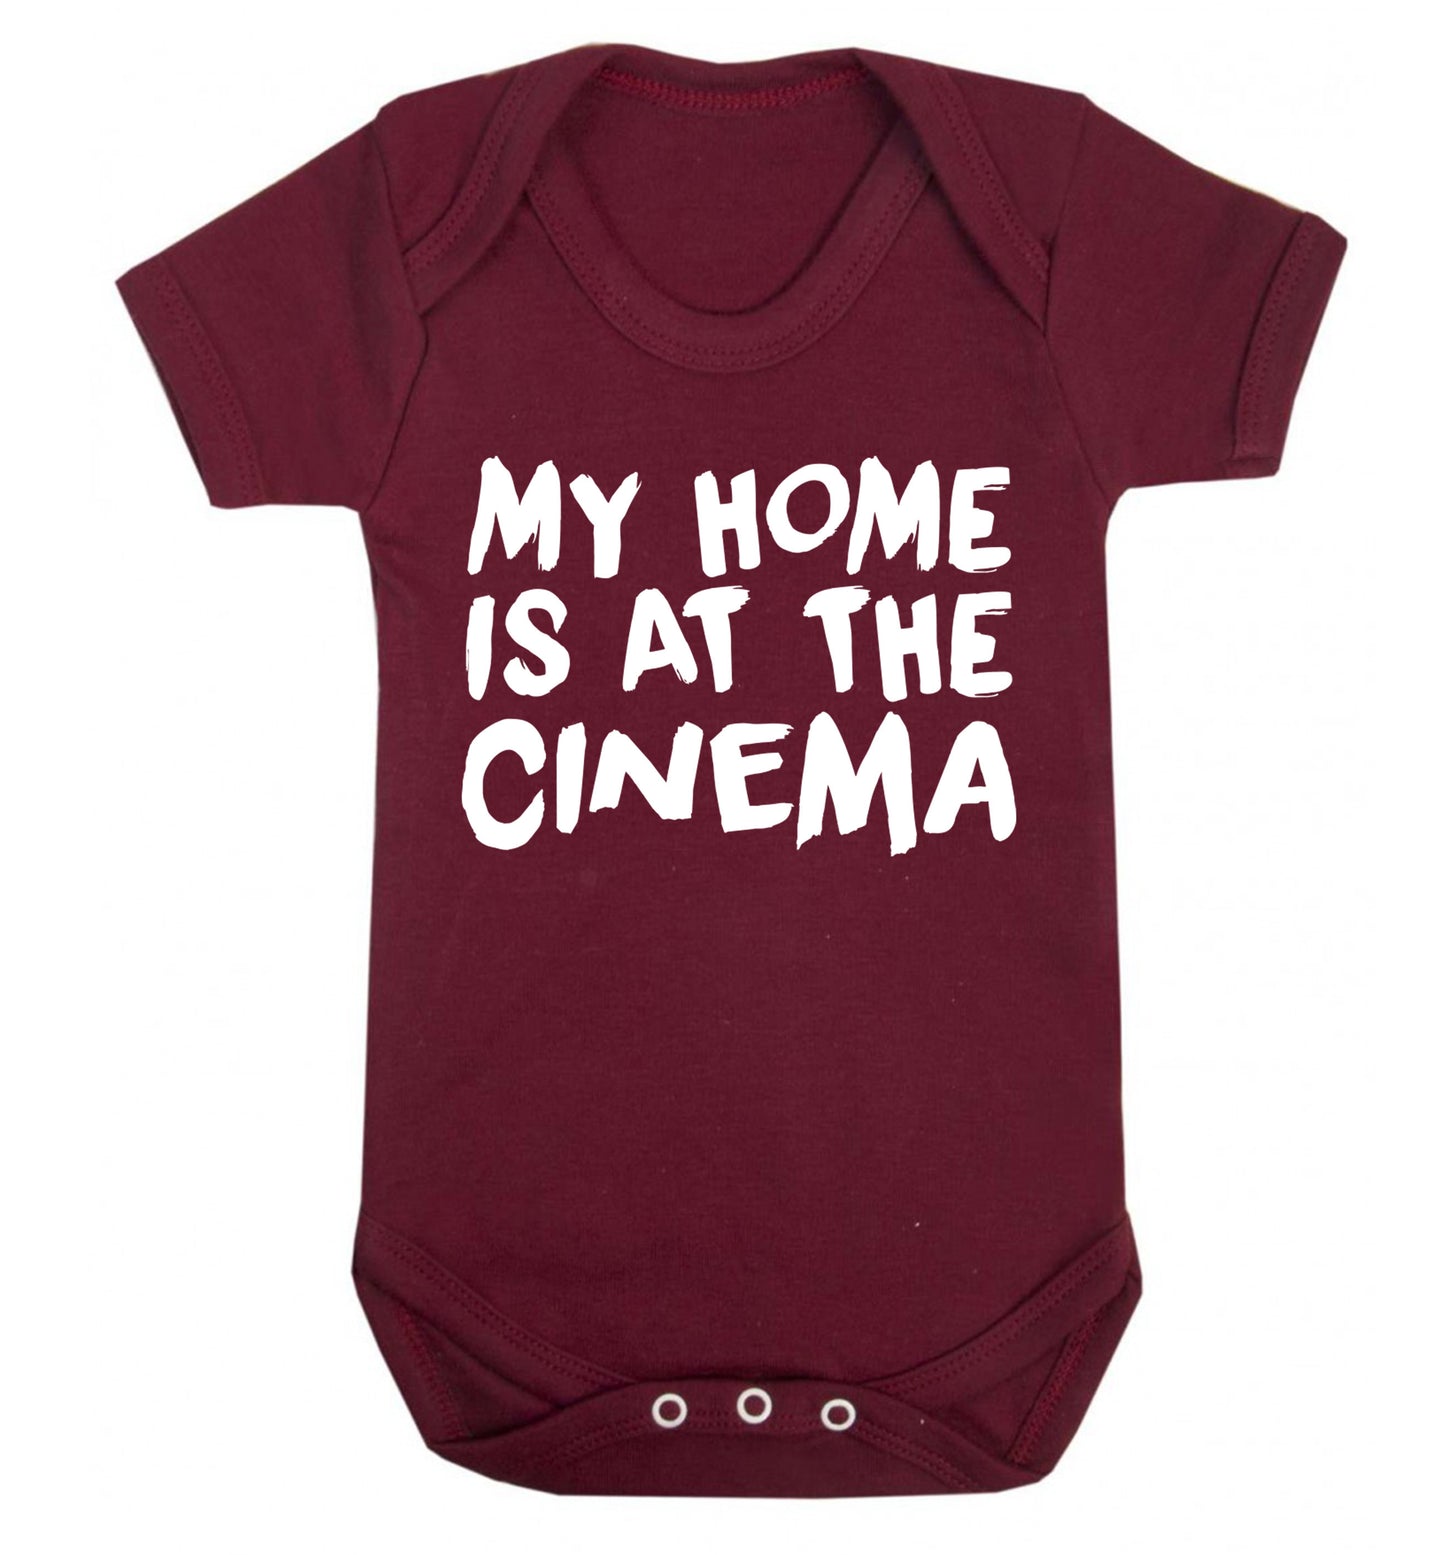 My home is at the cinema Baby Vest maroon 18-24 months